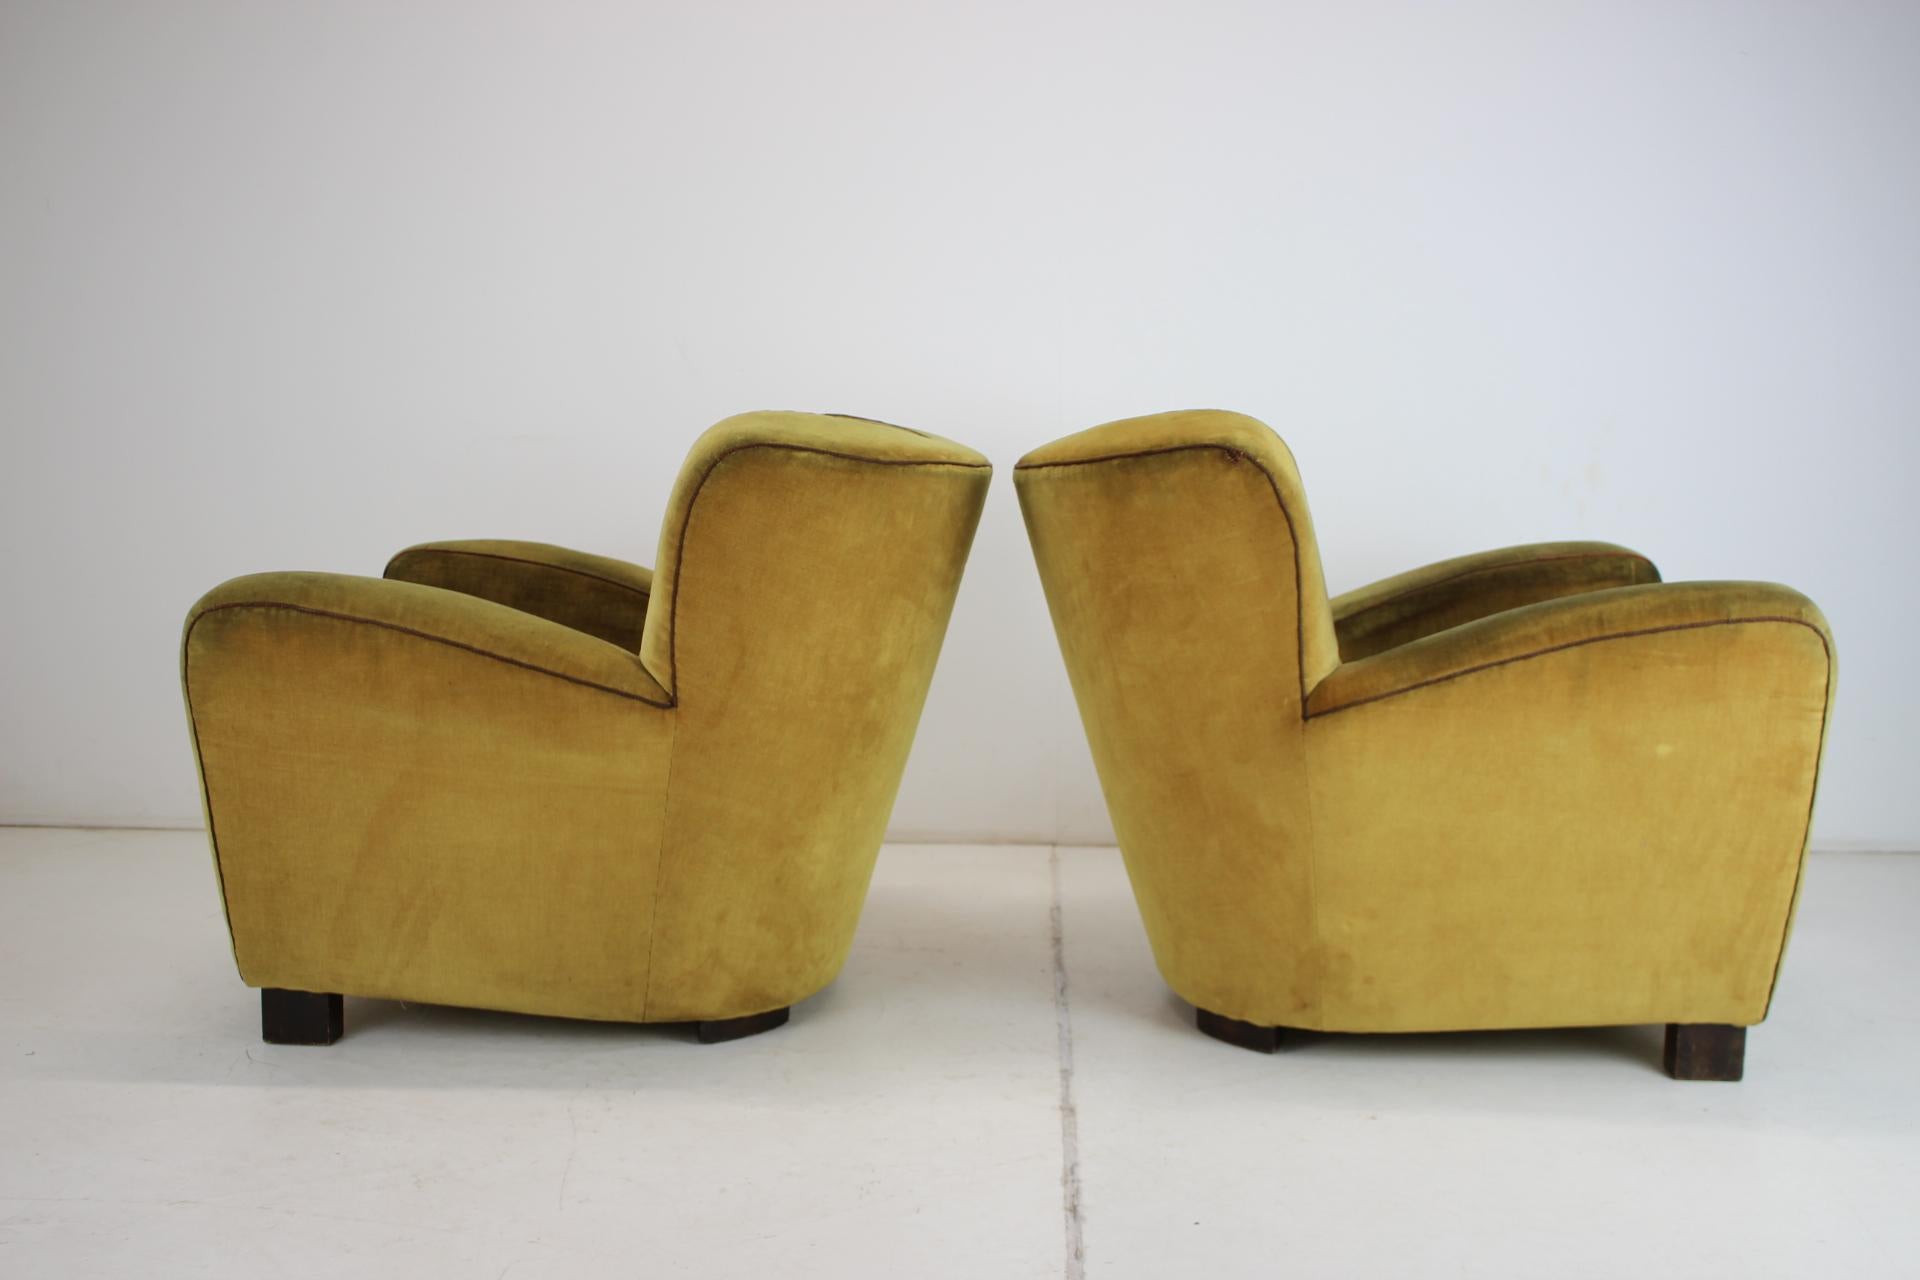 Set of Two Design Art Deco, Club Armchairs, 1930s For Sale 2